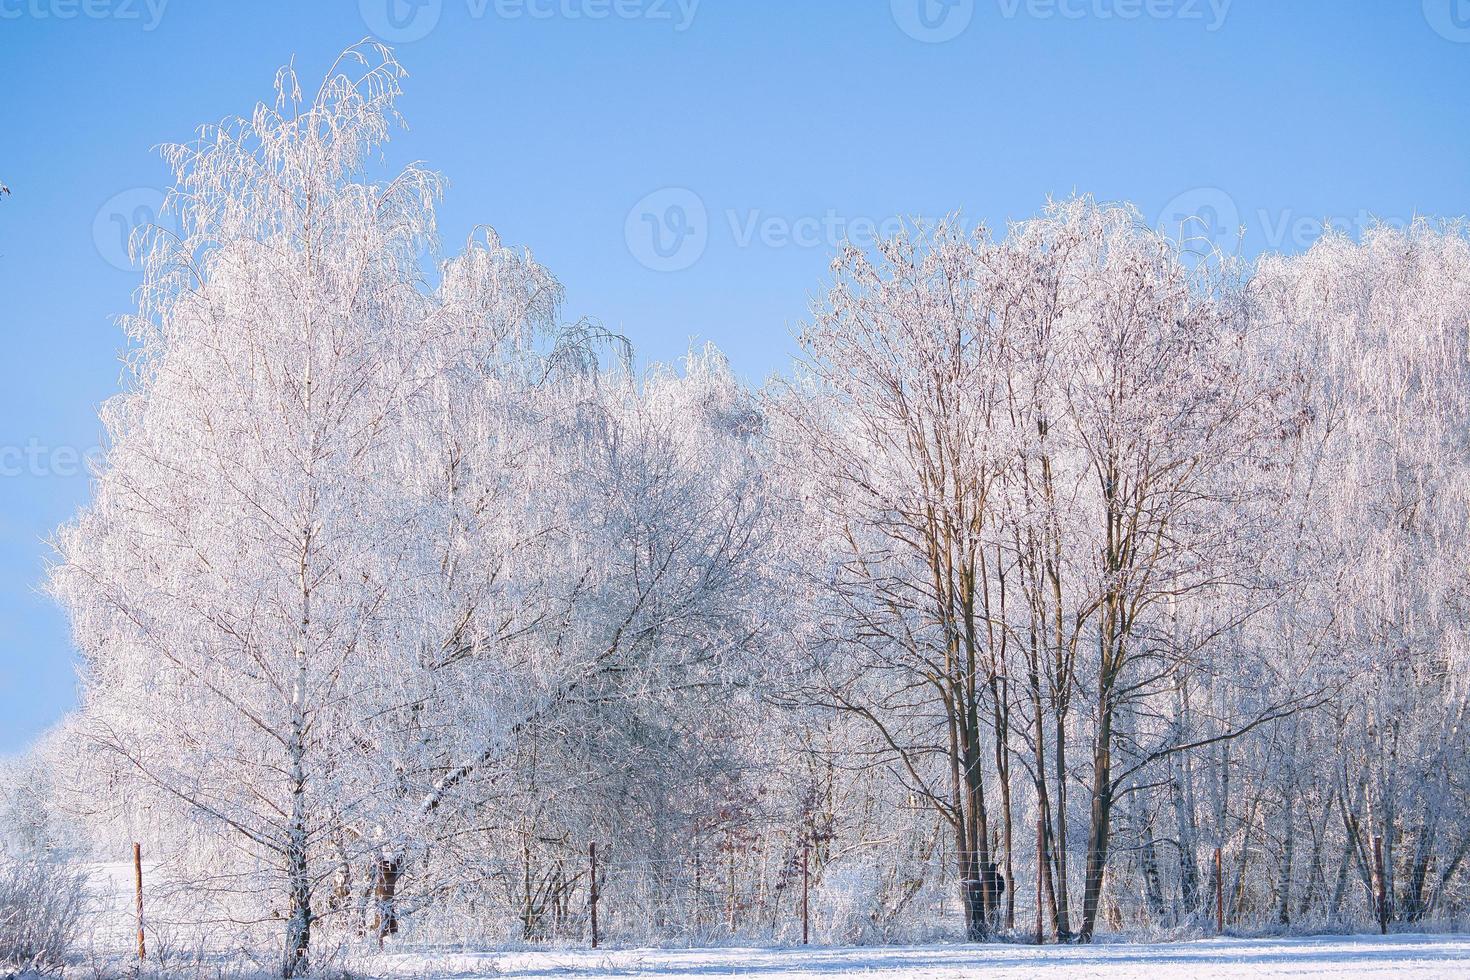 Winter landscape with icy, snowy birch trees on snow-covered field. Frosty landscape photo